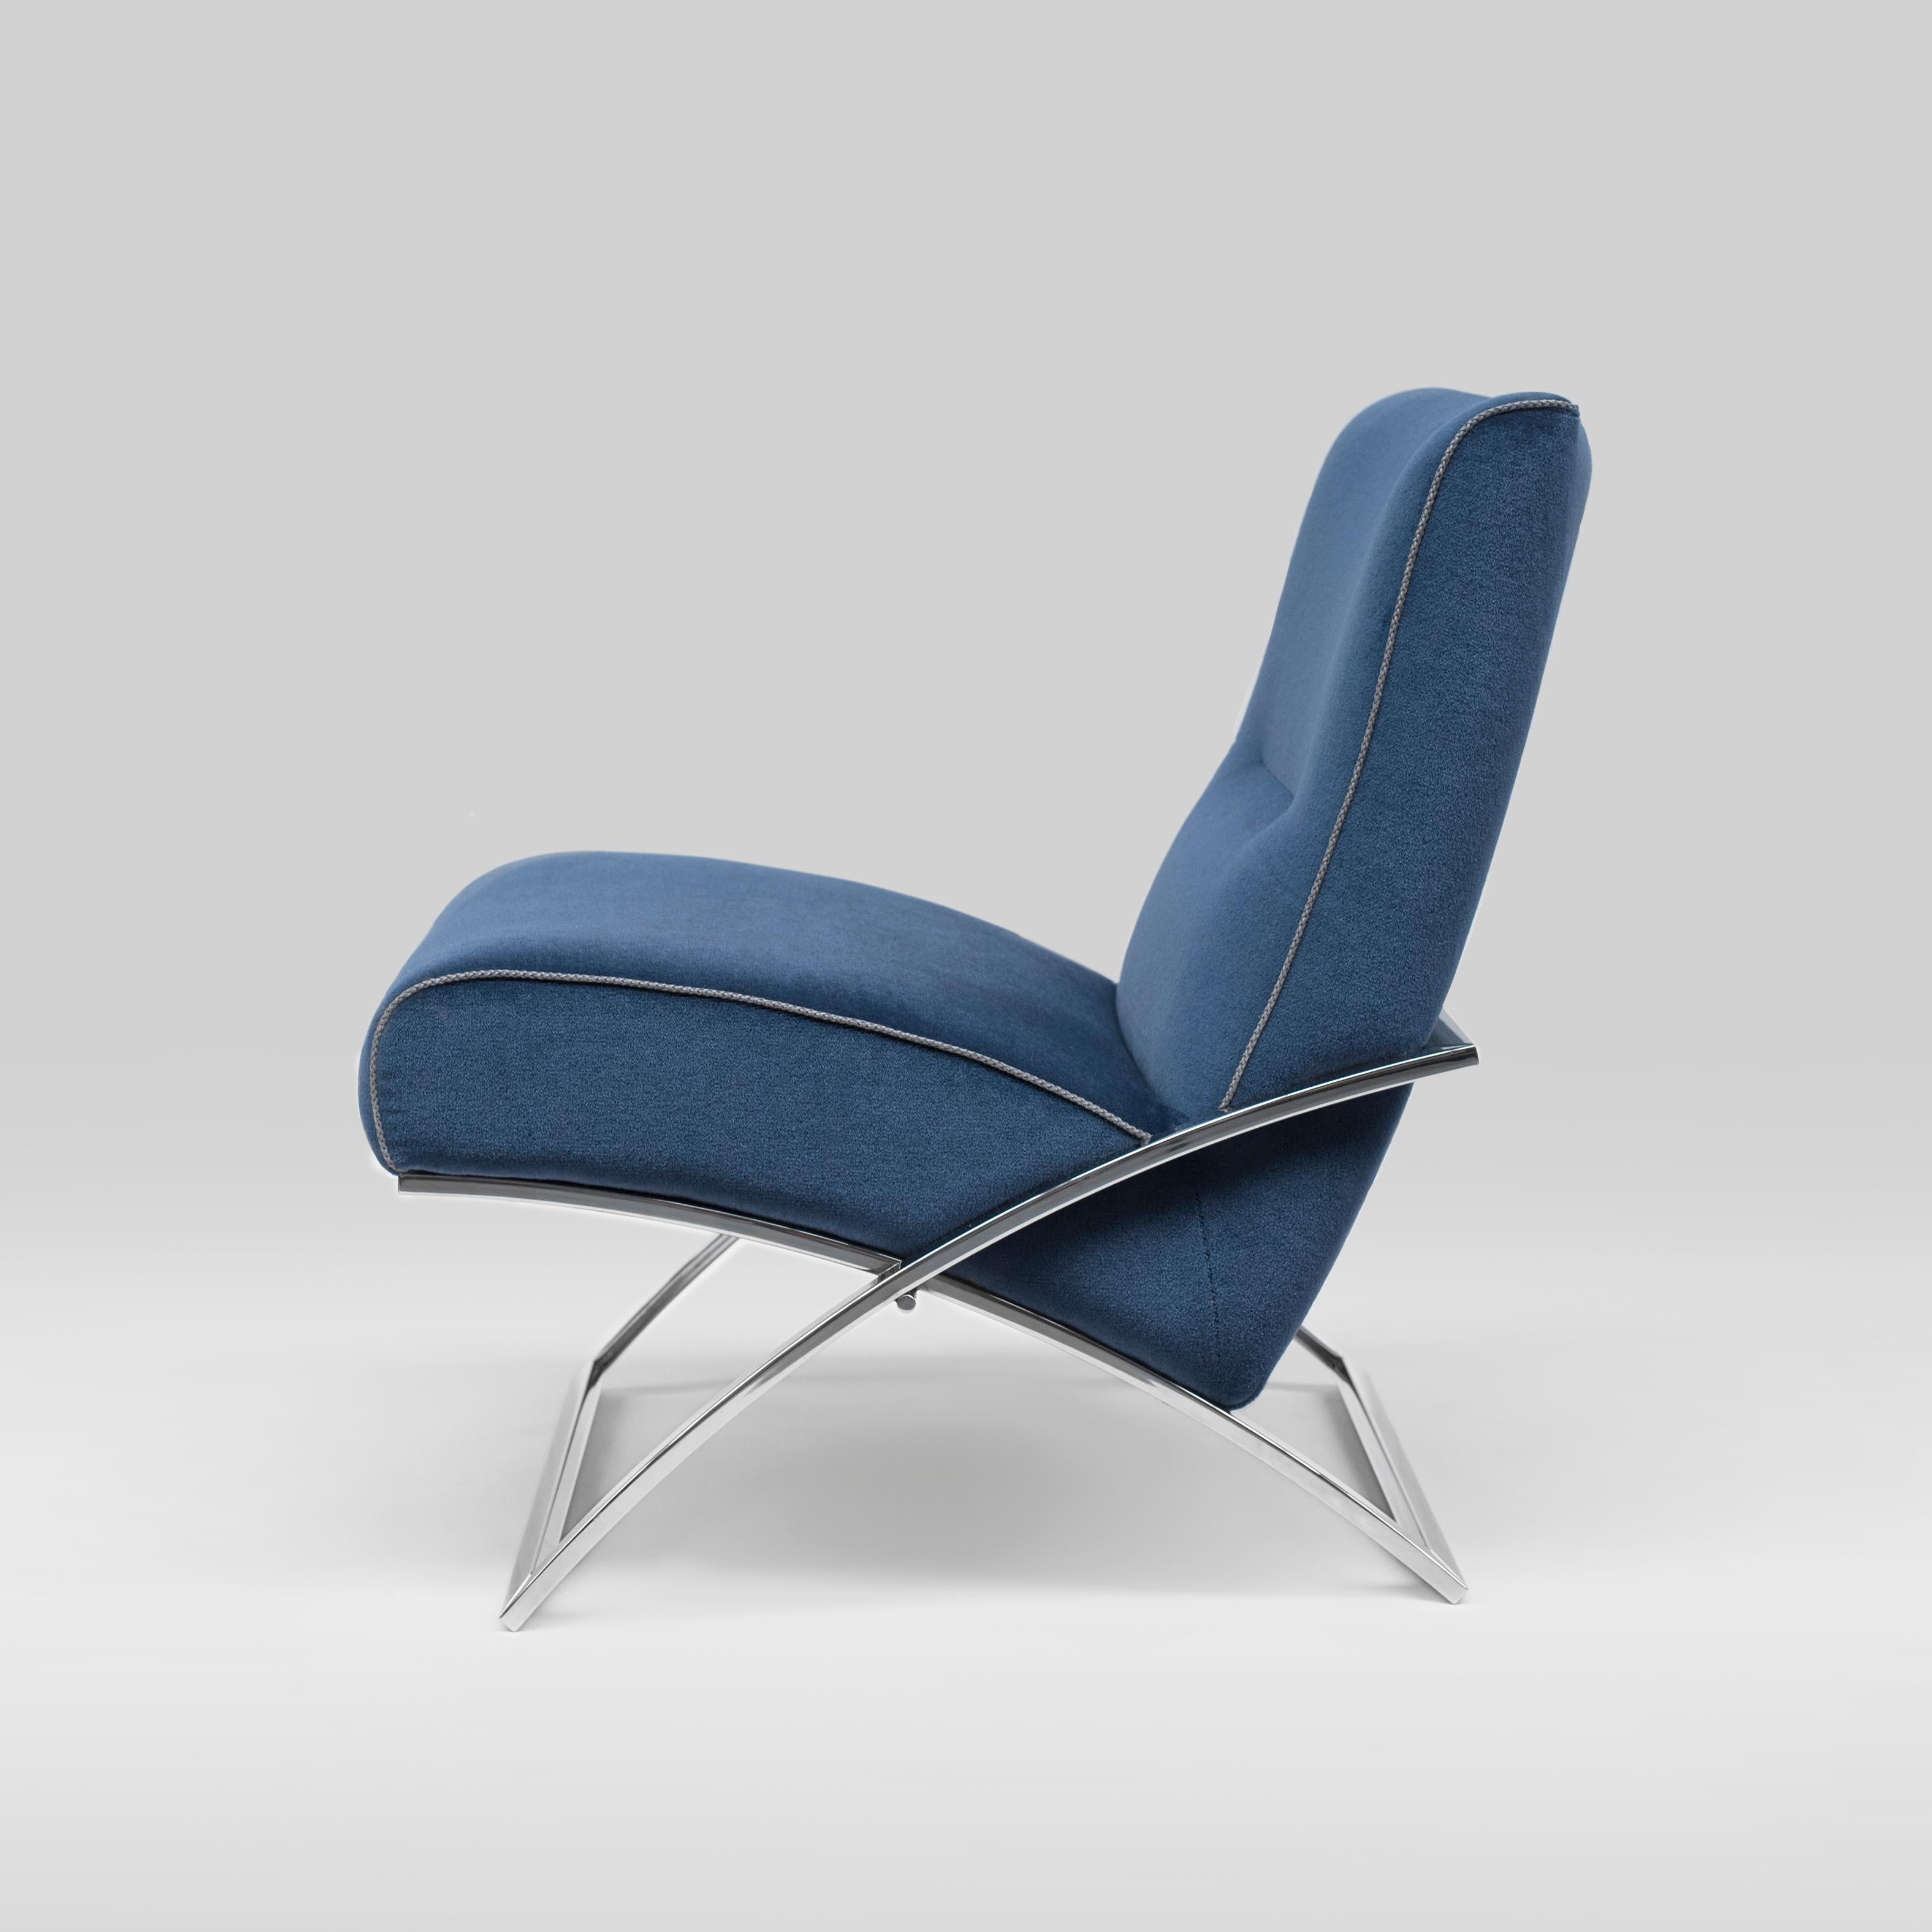 Armchair designed by Peter Ghyczy in 2016.
Manufactured by Ghyczy (Netherlands)

The construction of this chair is reduced to the minimum while keeping the comfort. The two curved intersecting frames support the upholstery. The form of the frame